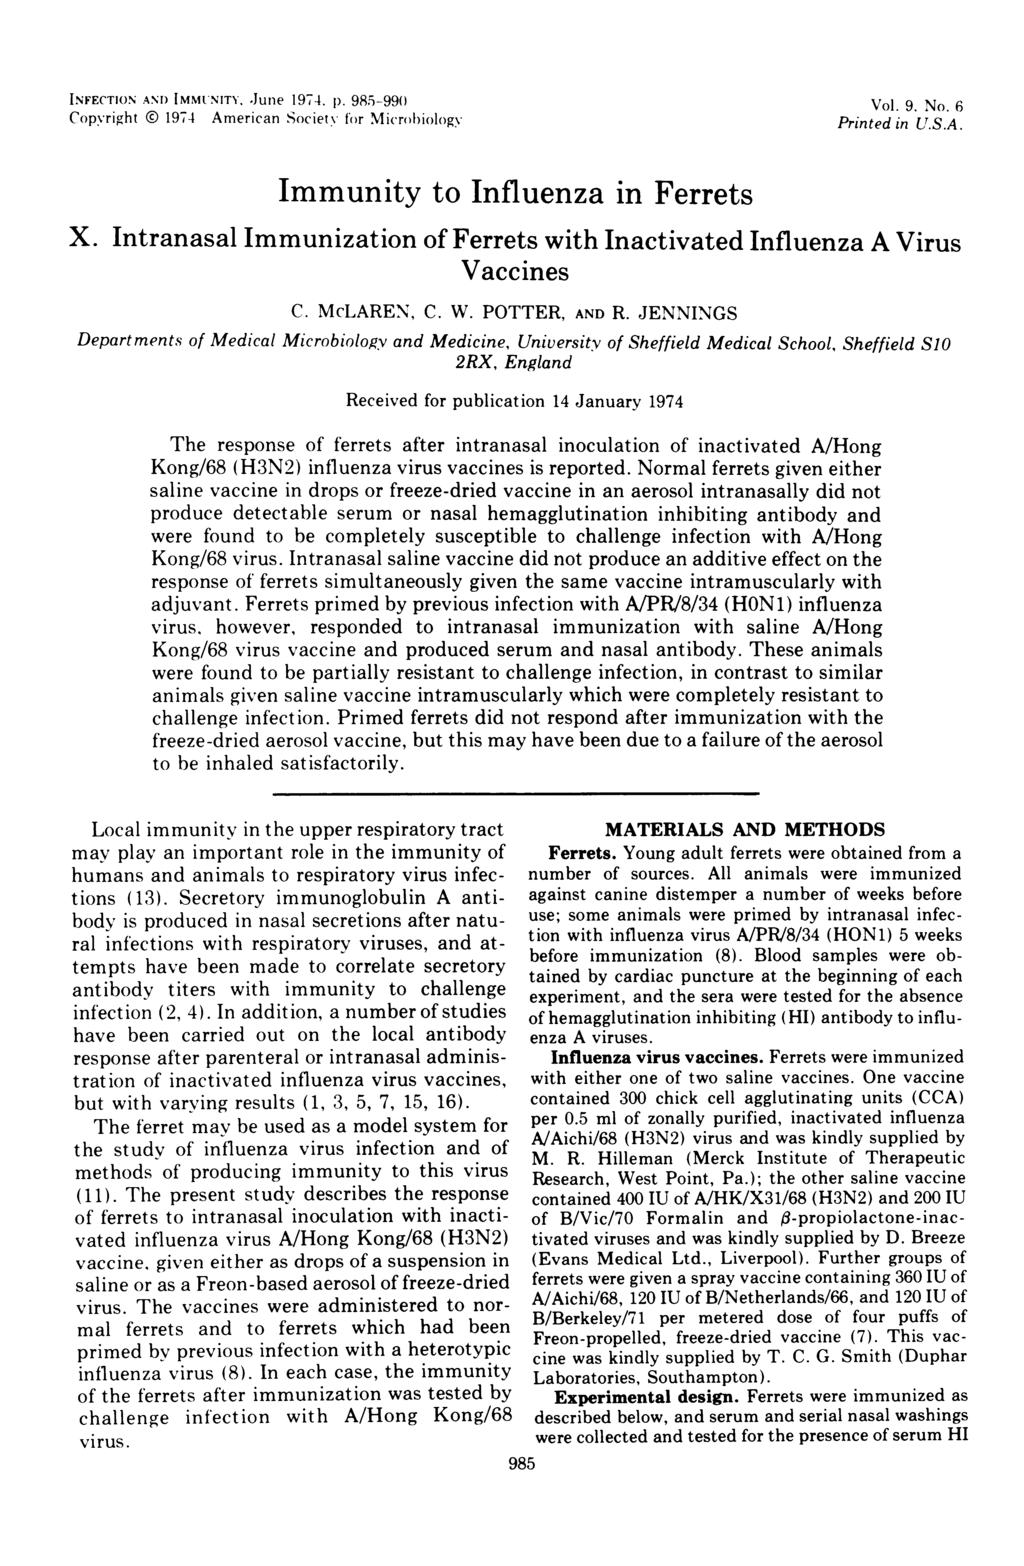 INFECTION ANI) IMMUNITY. June 1974. 1). 985-99) Copyright ( 1974 American Society for Microbiology Vol. 9. No. 6 Printed in U.S.A. Immunity to Influenza in Ferrets X.